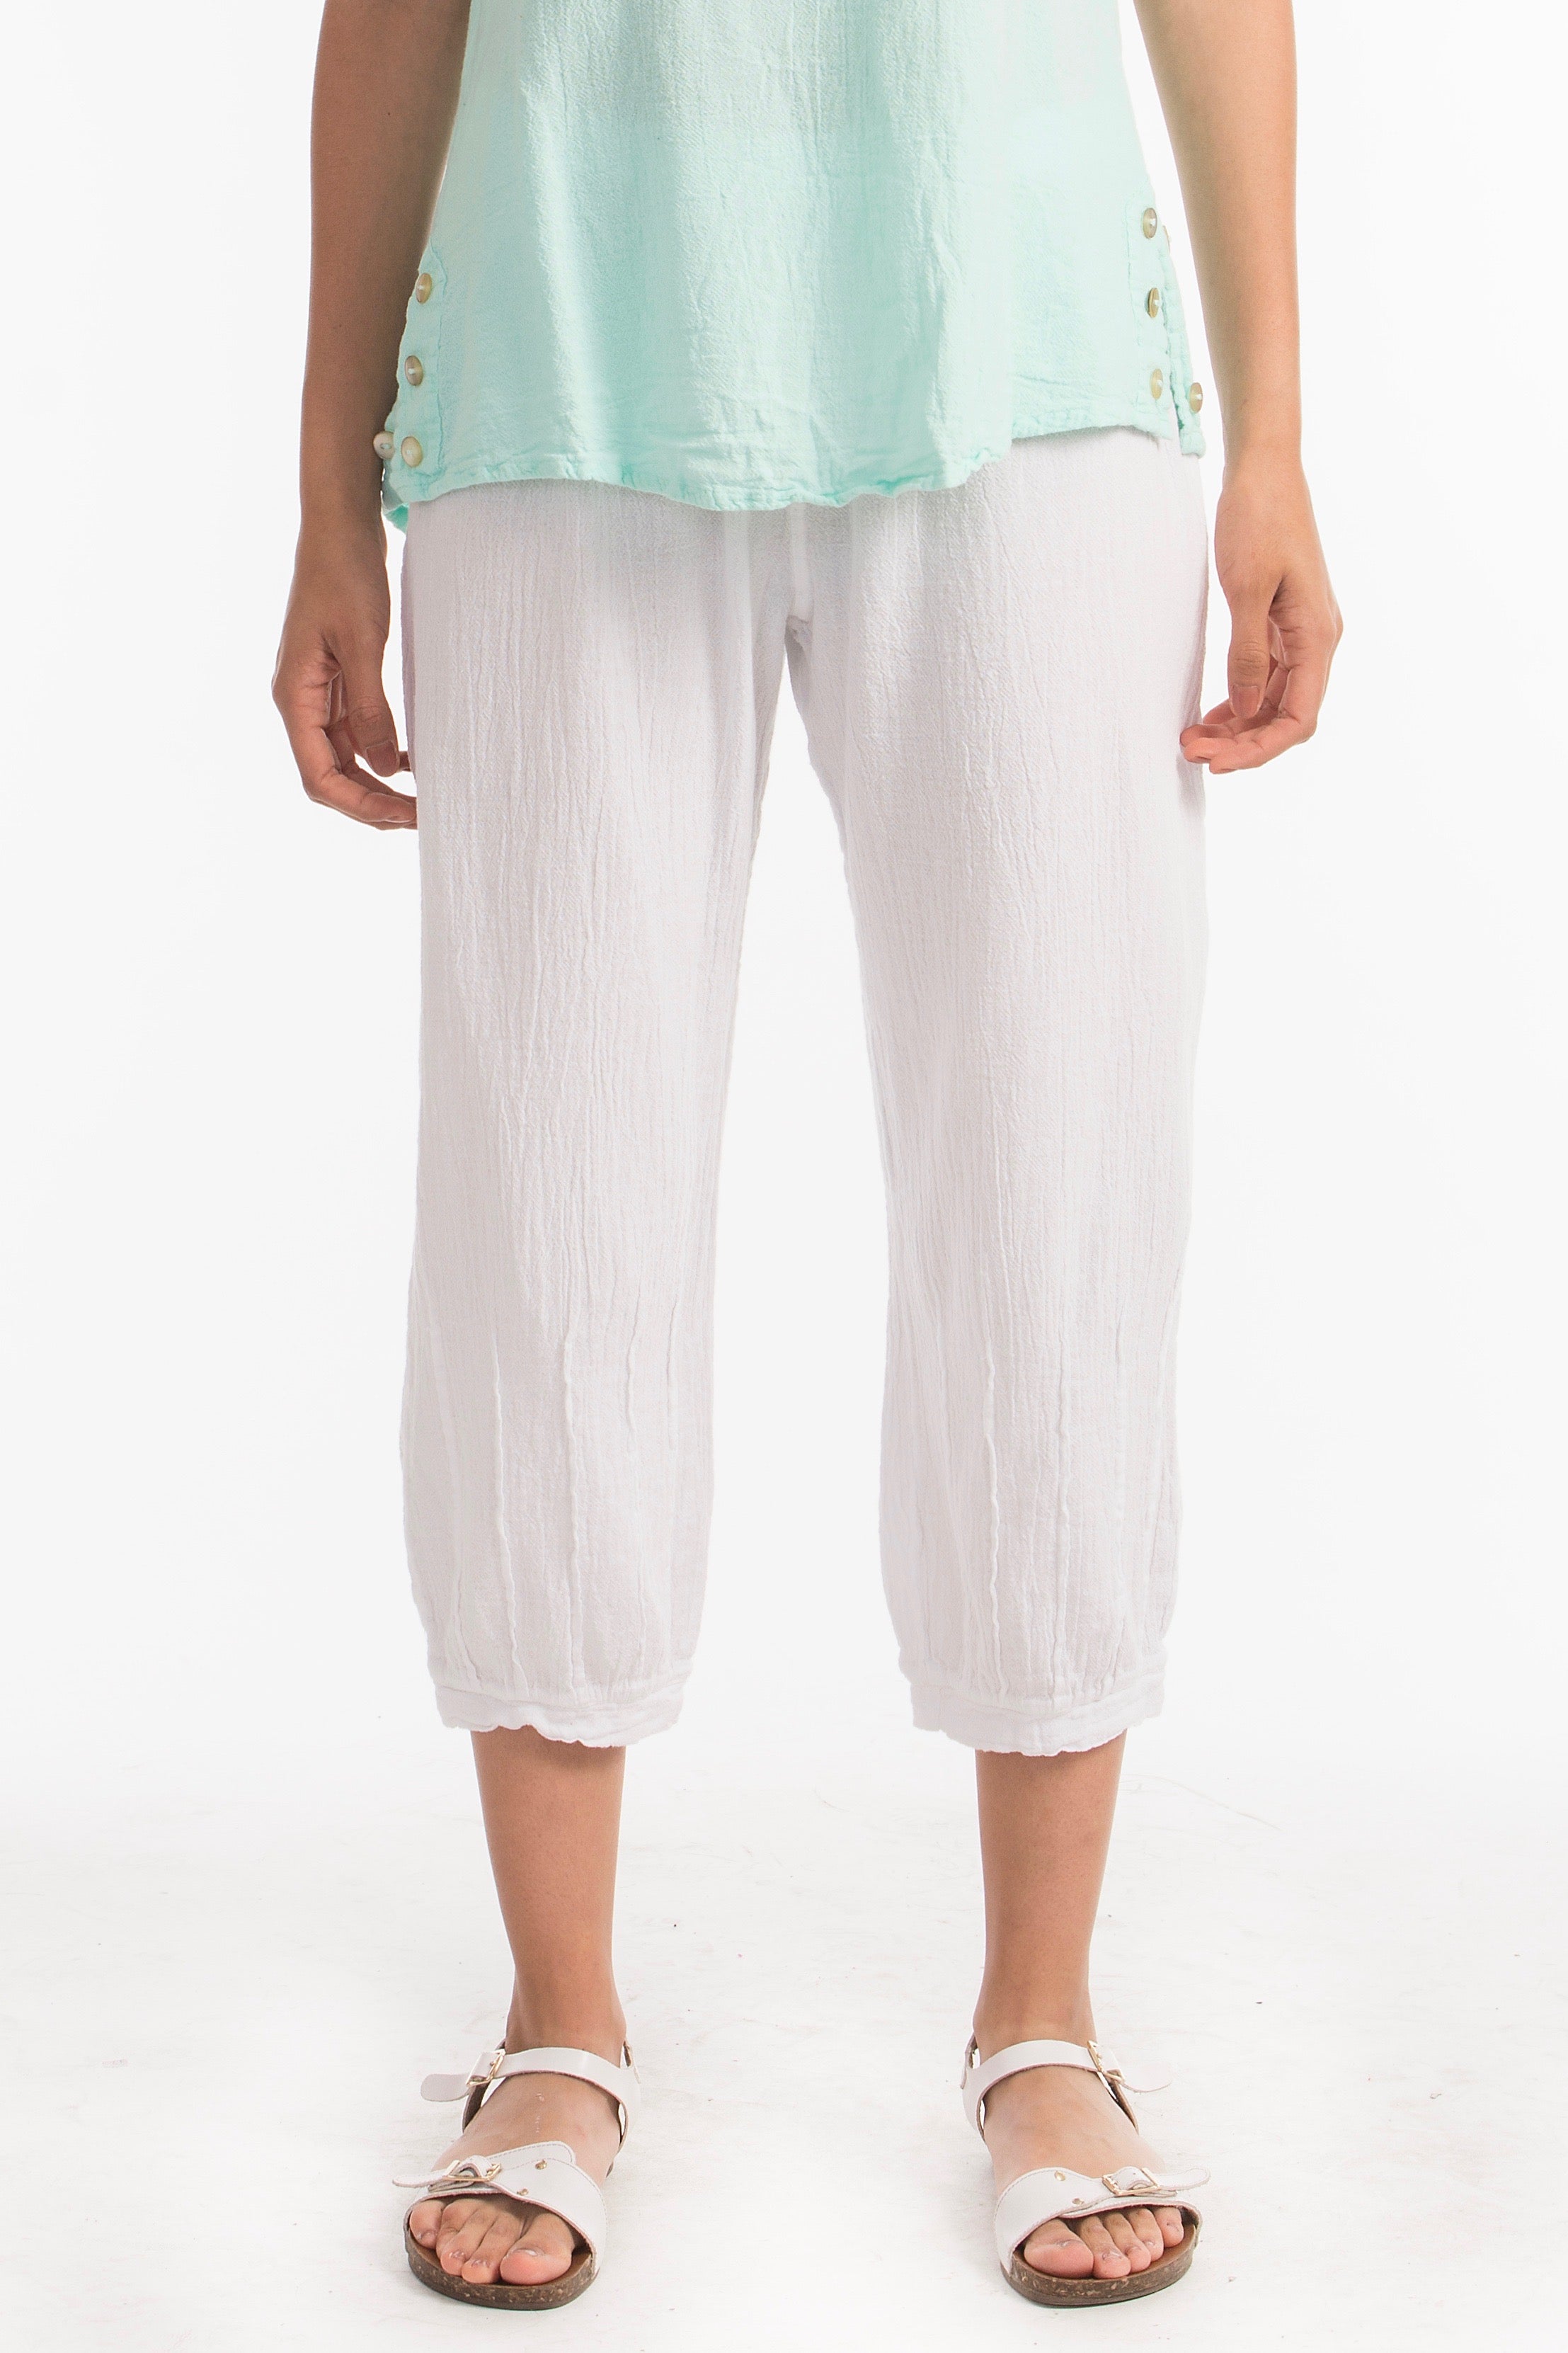 Ashley Pant- Featuring darted cuffs 100% Cotton Gauze